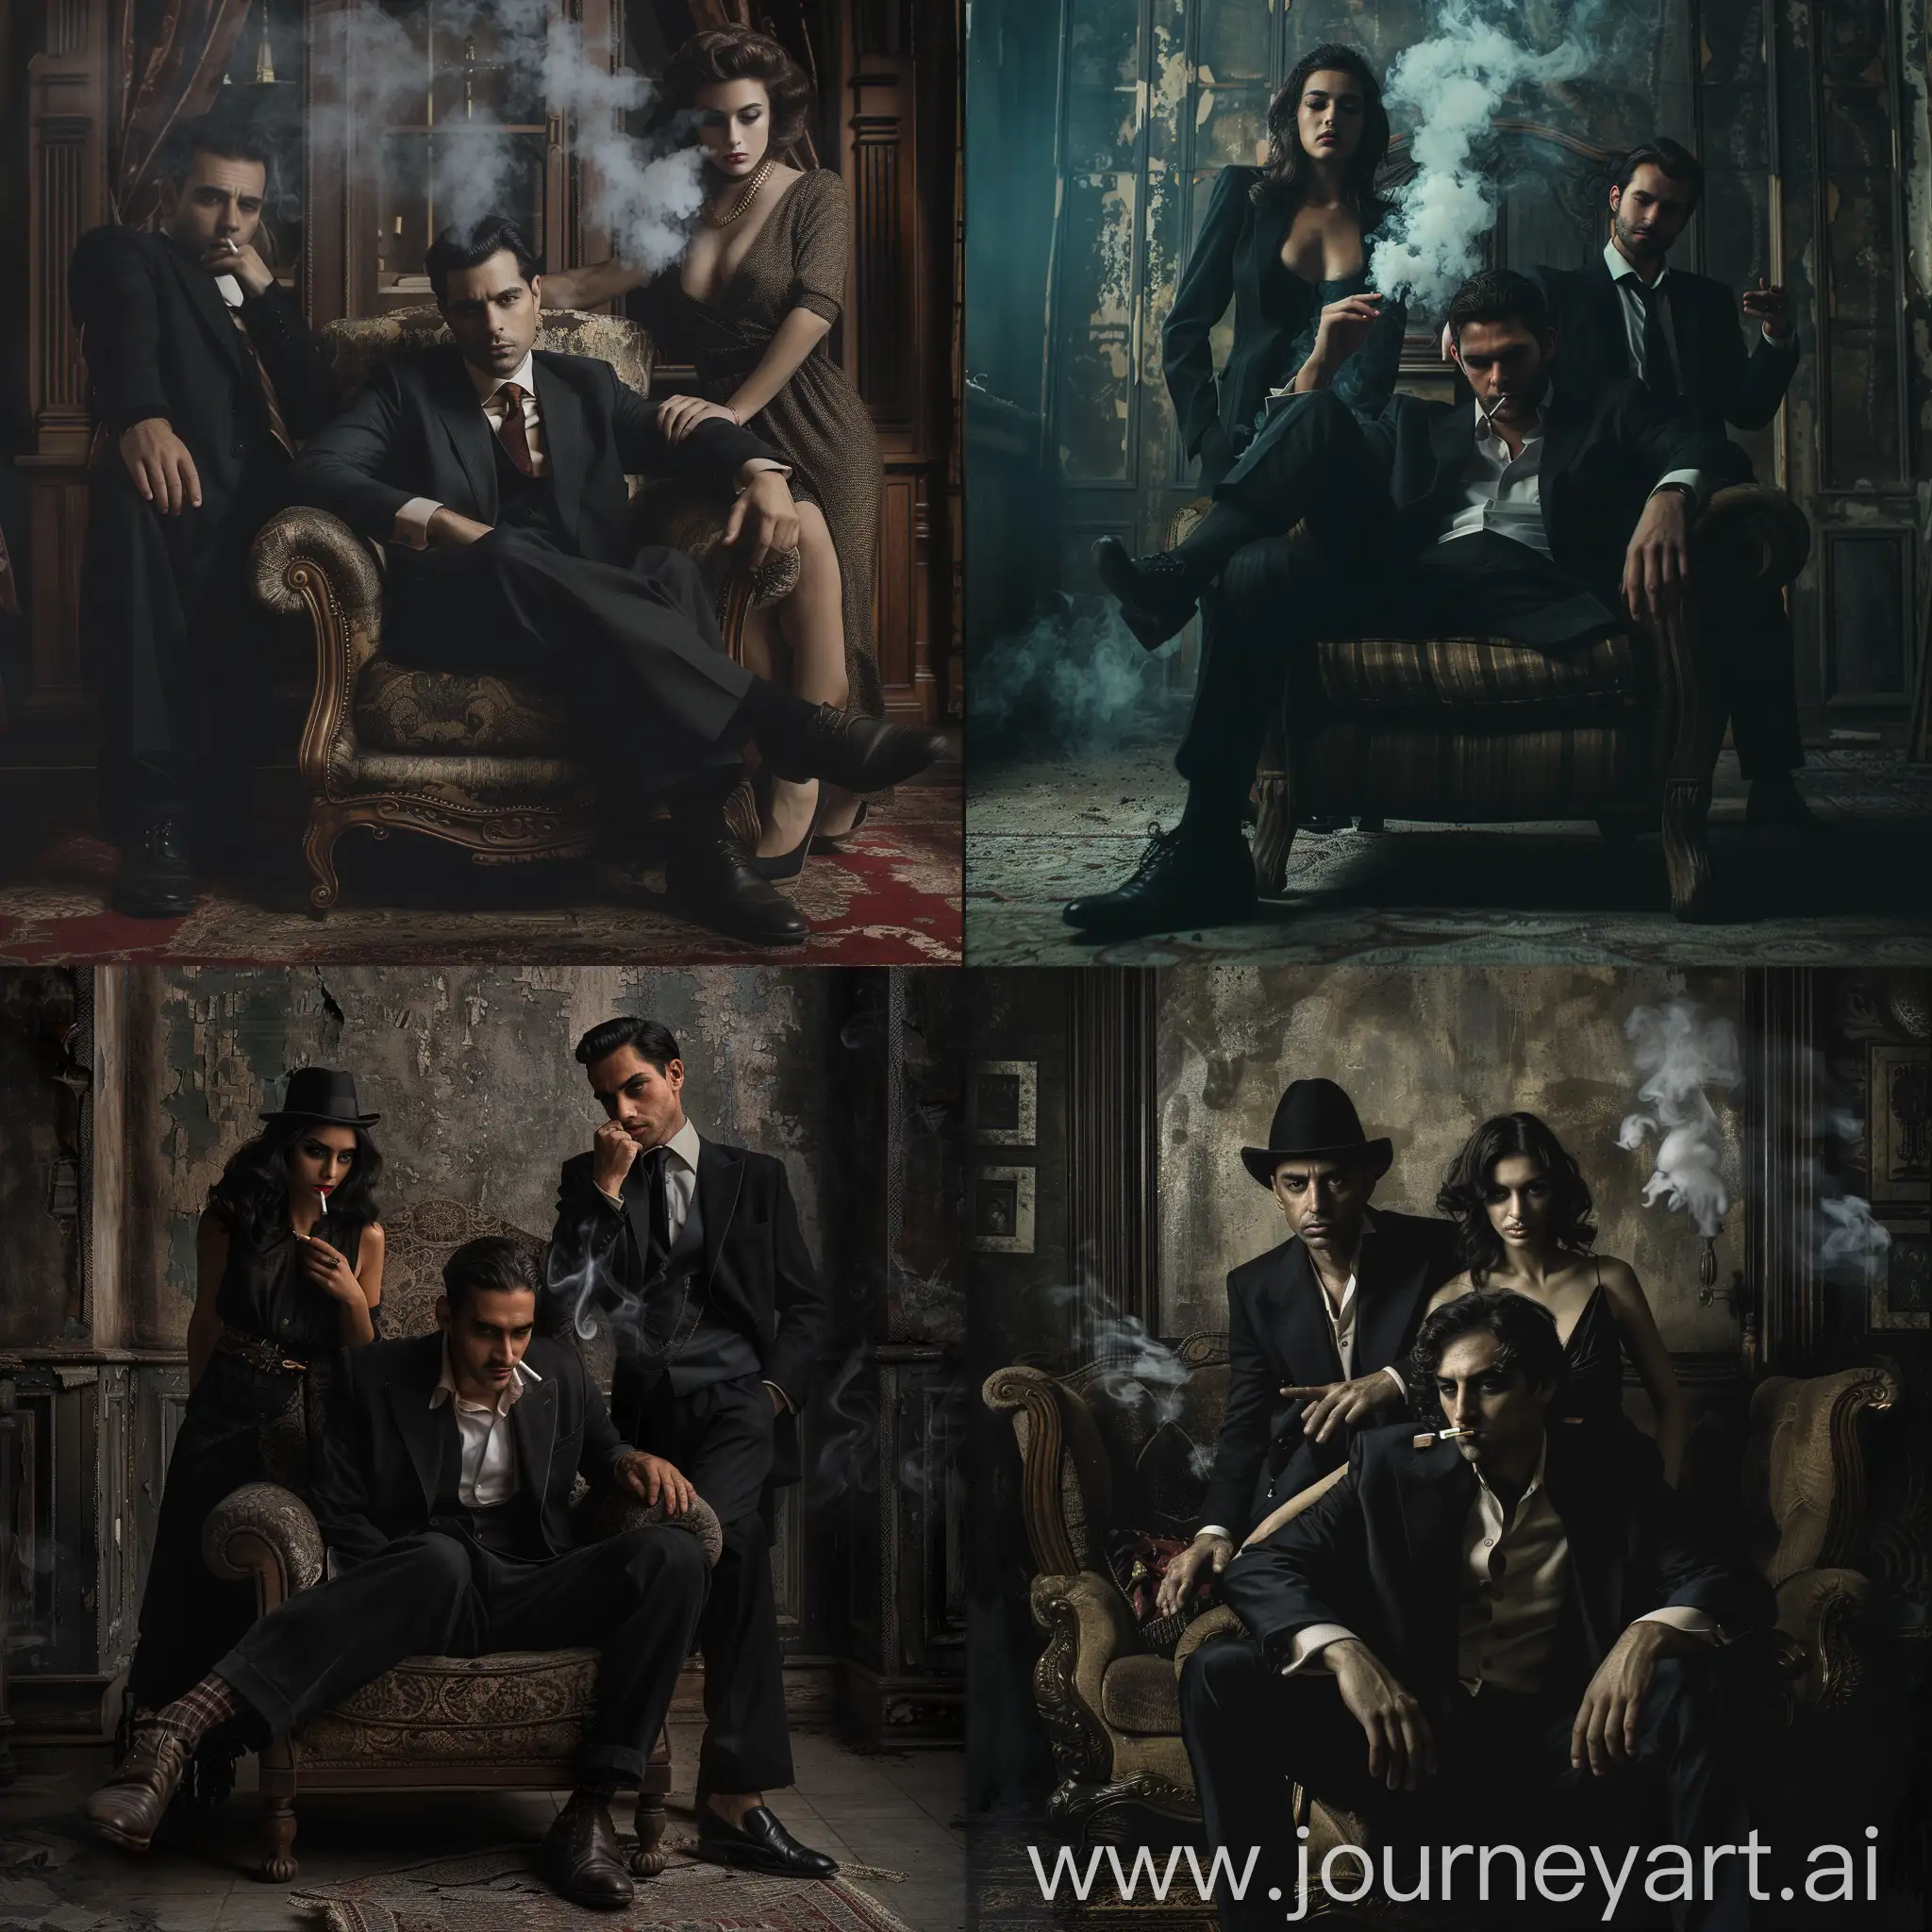 3 people of Italian appearance, mafiosi came to the old mansion of the 20th century to Don, sitting on an armchair and smoking a cigarette.